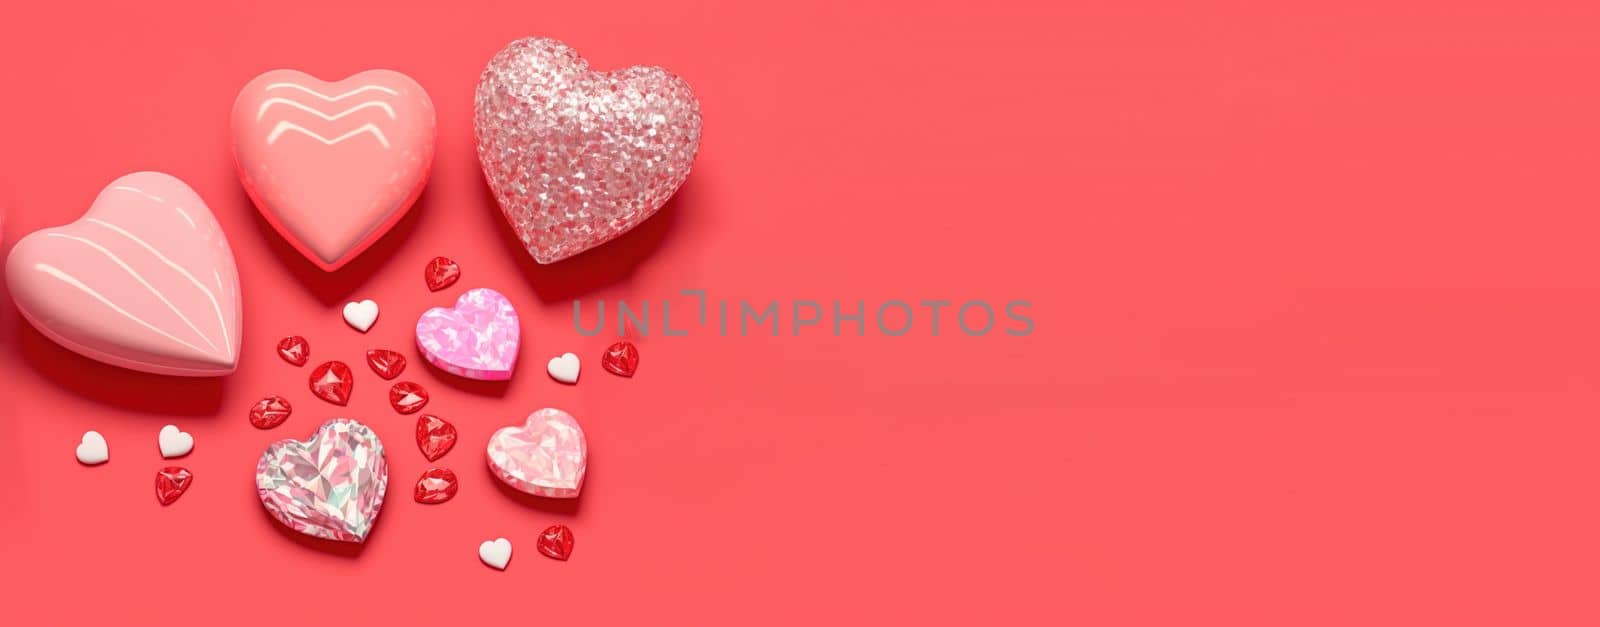 Glistening 3D Heart, Diamond, and Crystal Illustration for Valentine's Day Theme by templator